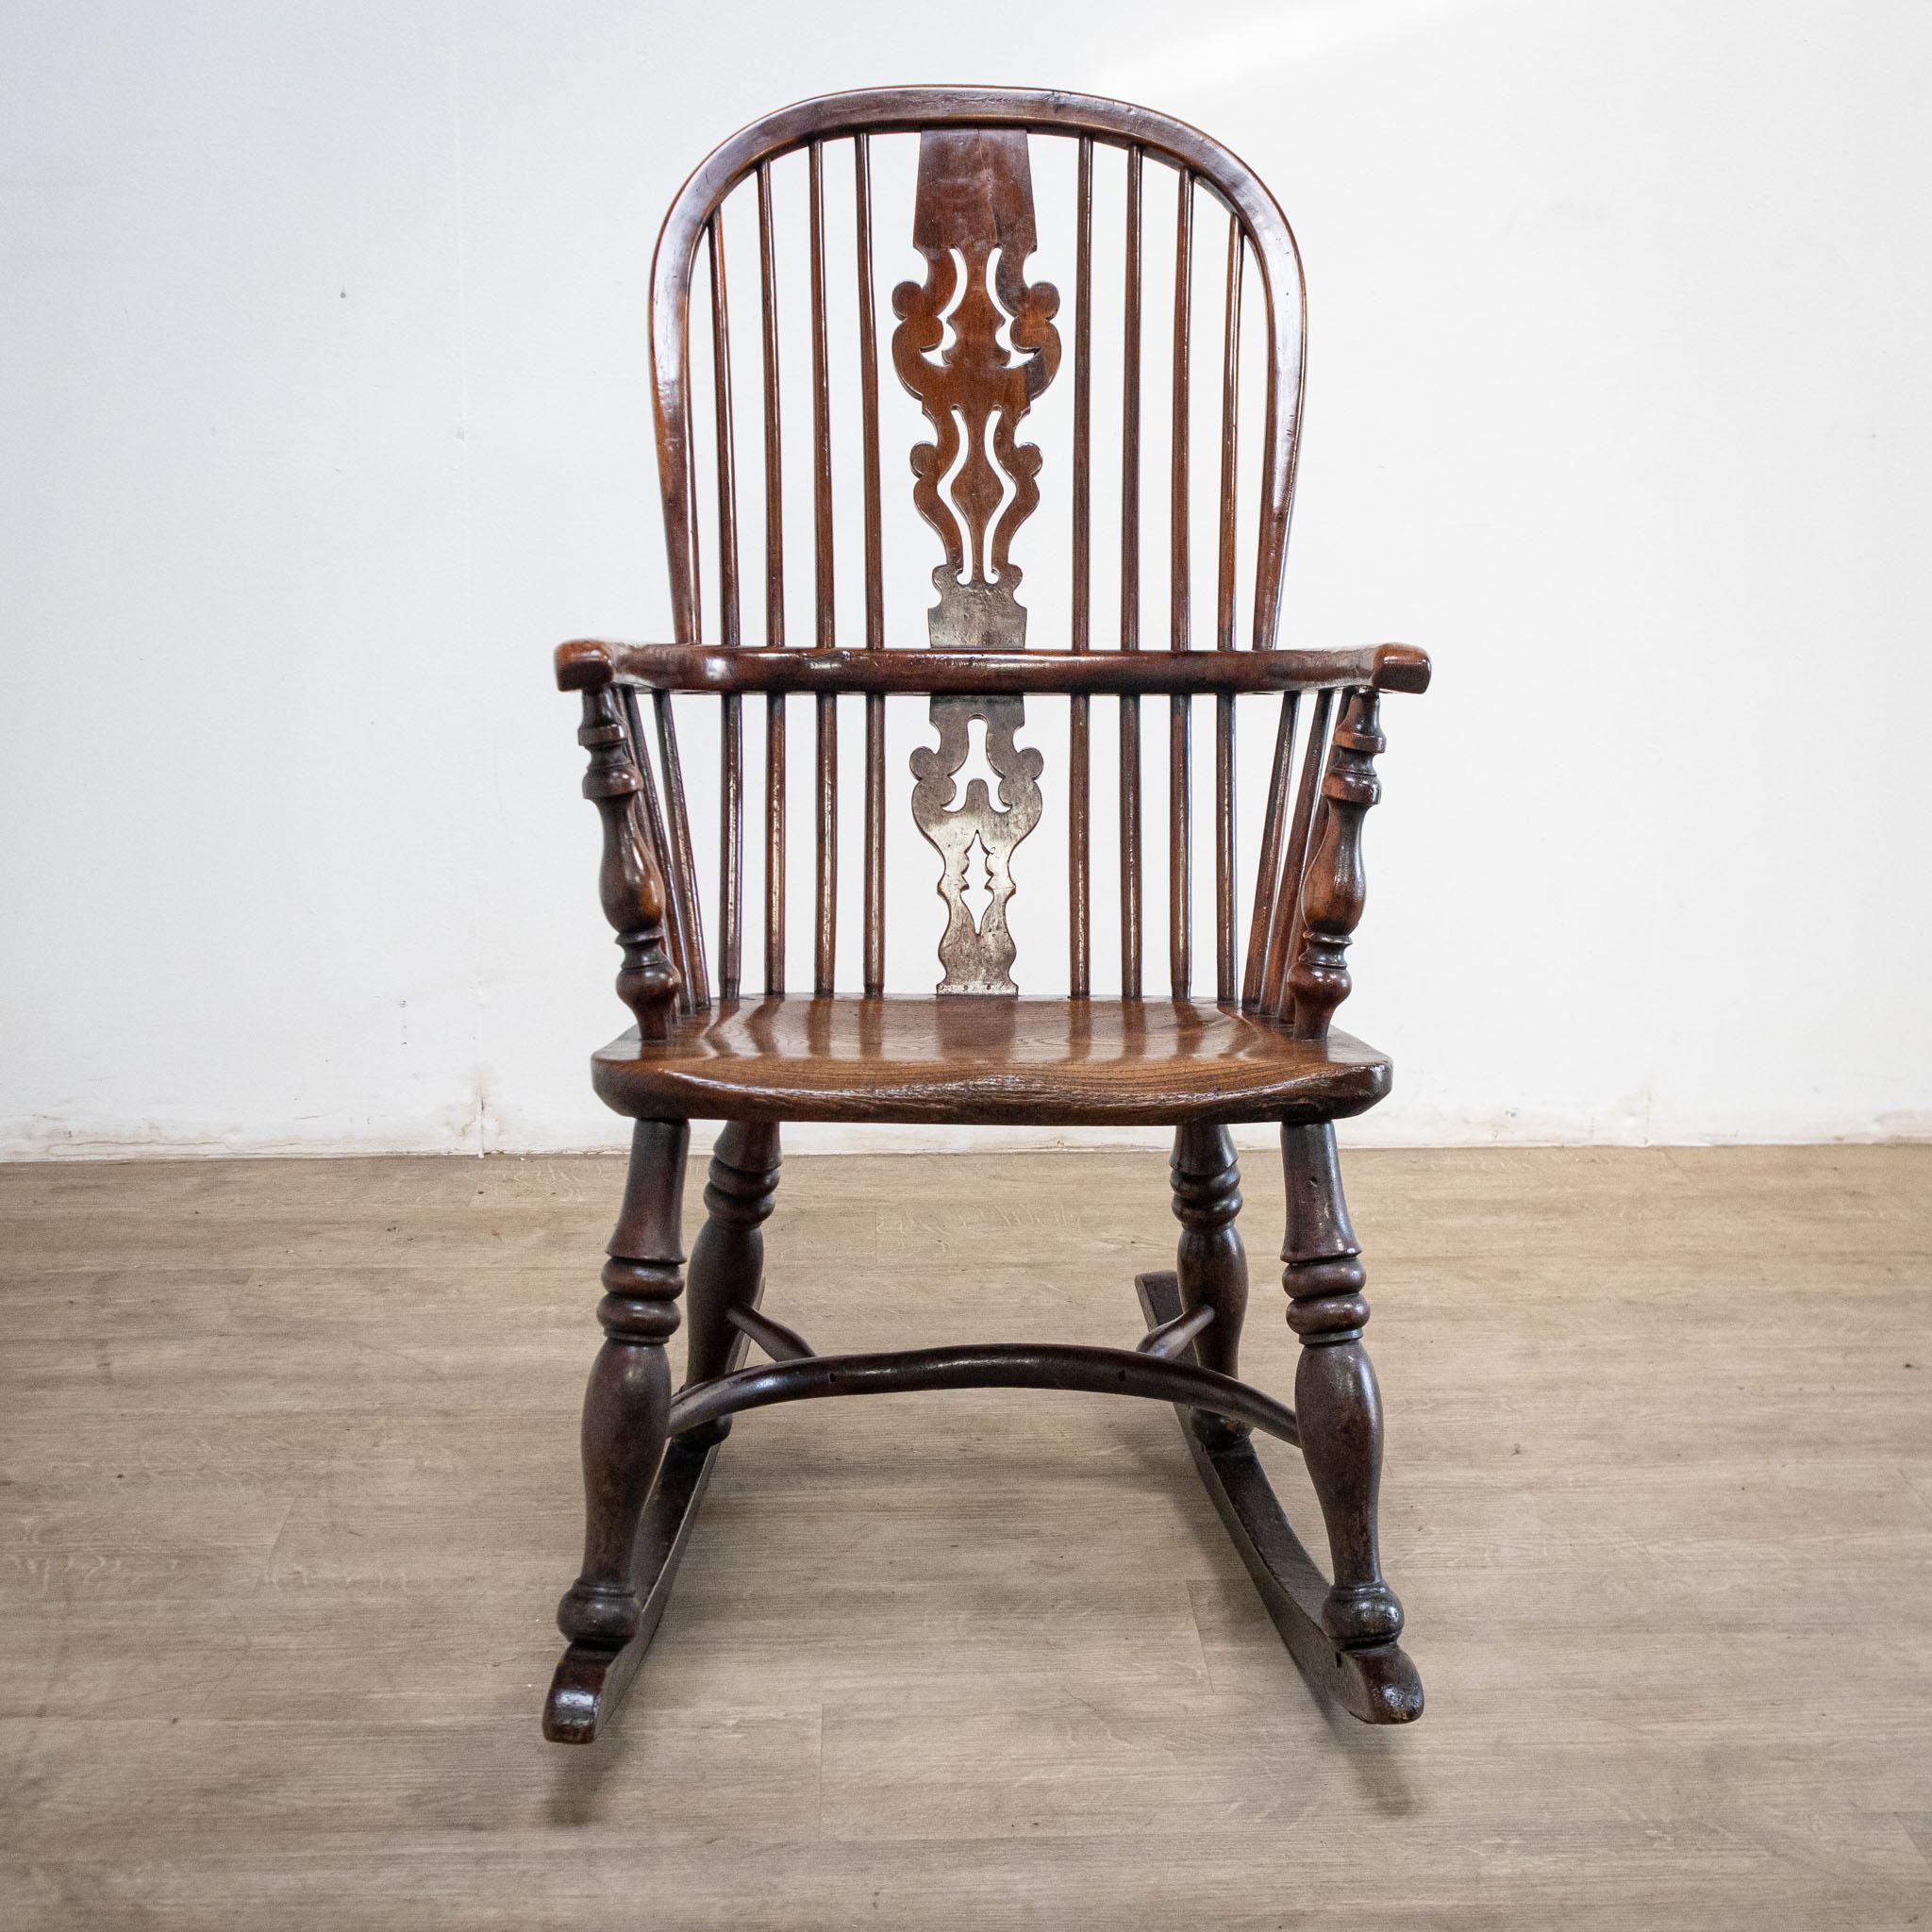 An attractive 19th century chair of yew, this has the appearance of a Windsor chair on a rocking base, with lovely tactile bentwood arms and a pierced splat. It has an incised stamp for the maker, J. Spencer, on the side of the seat.

- Decorative